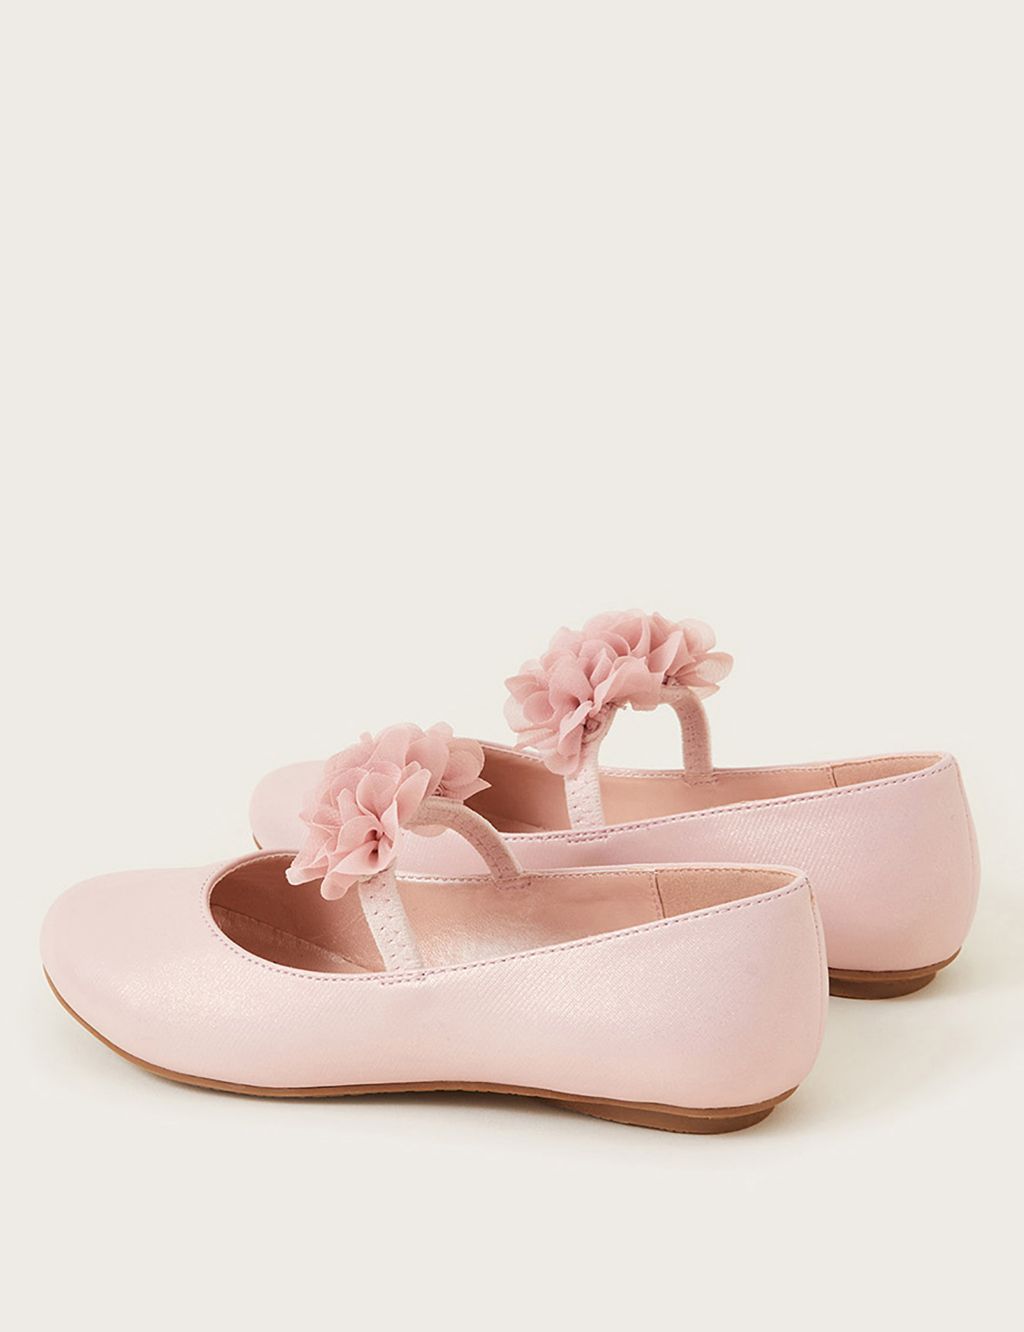 Kids' Floral Ballerina Party Shoes (1 Large-13 Large) 2 of 3